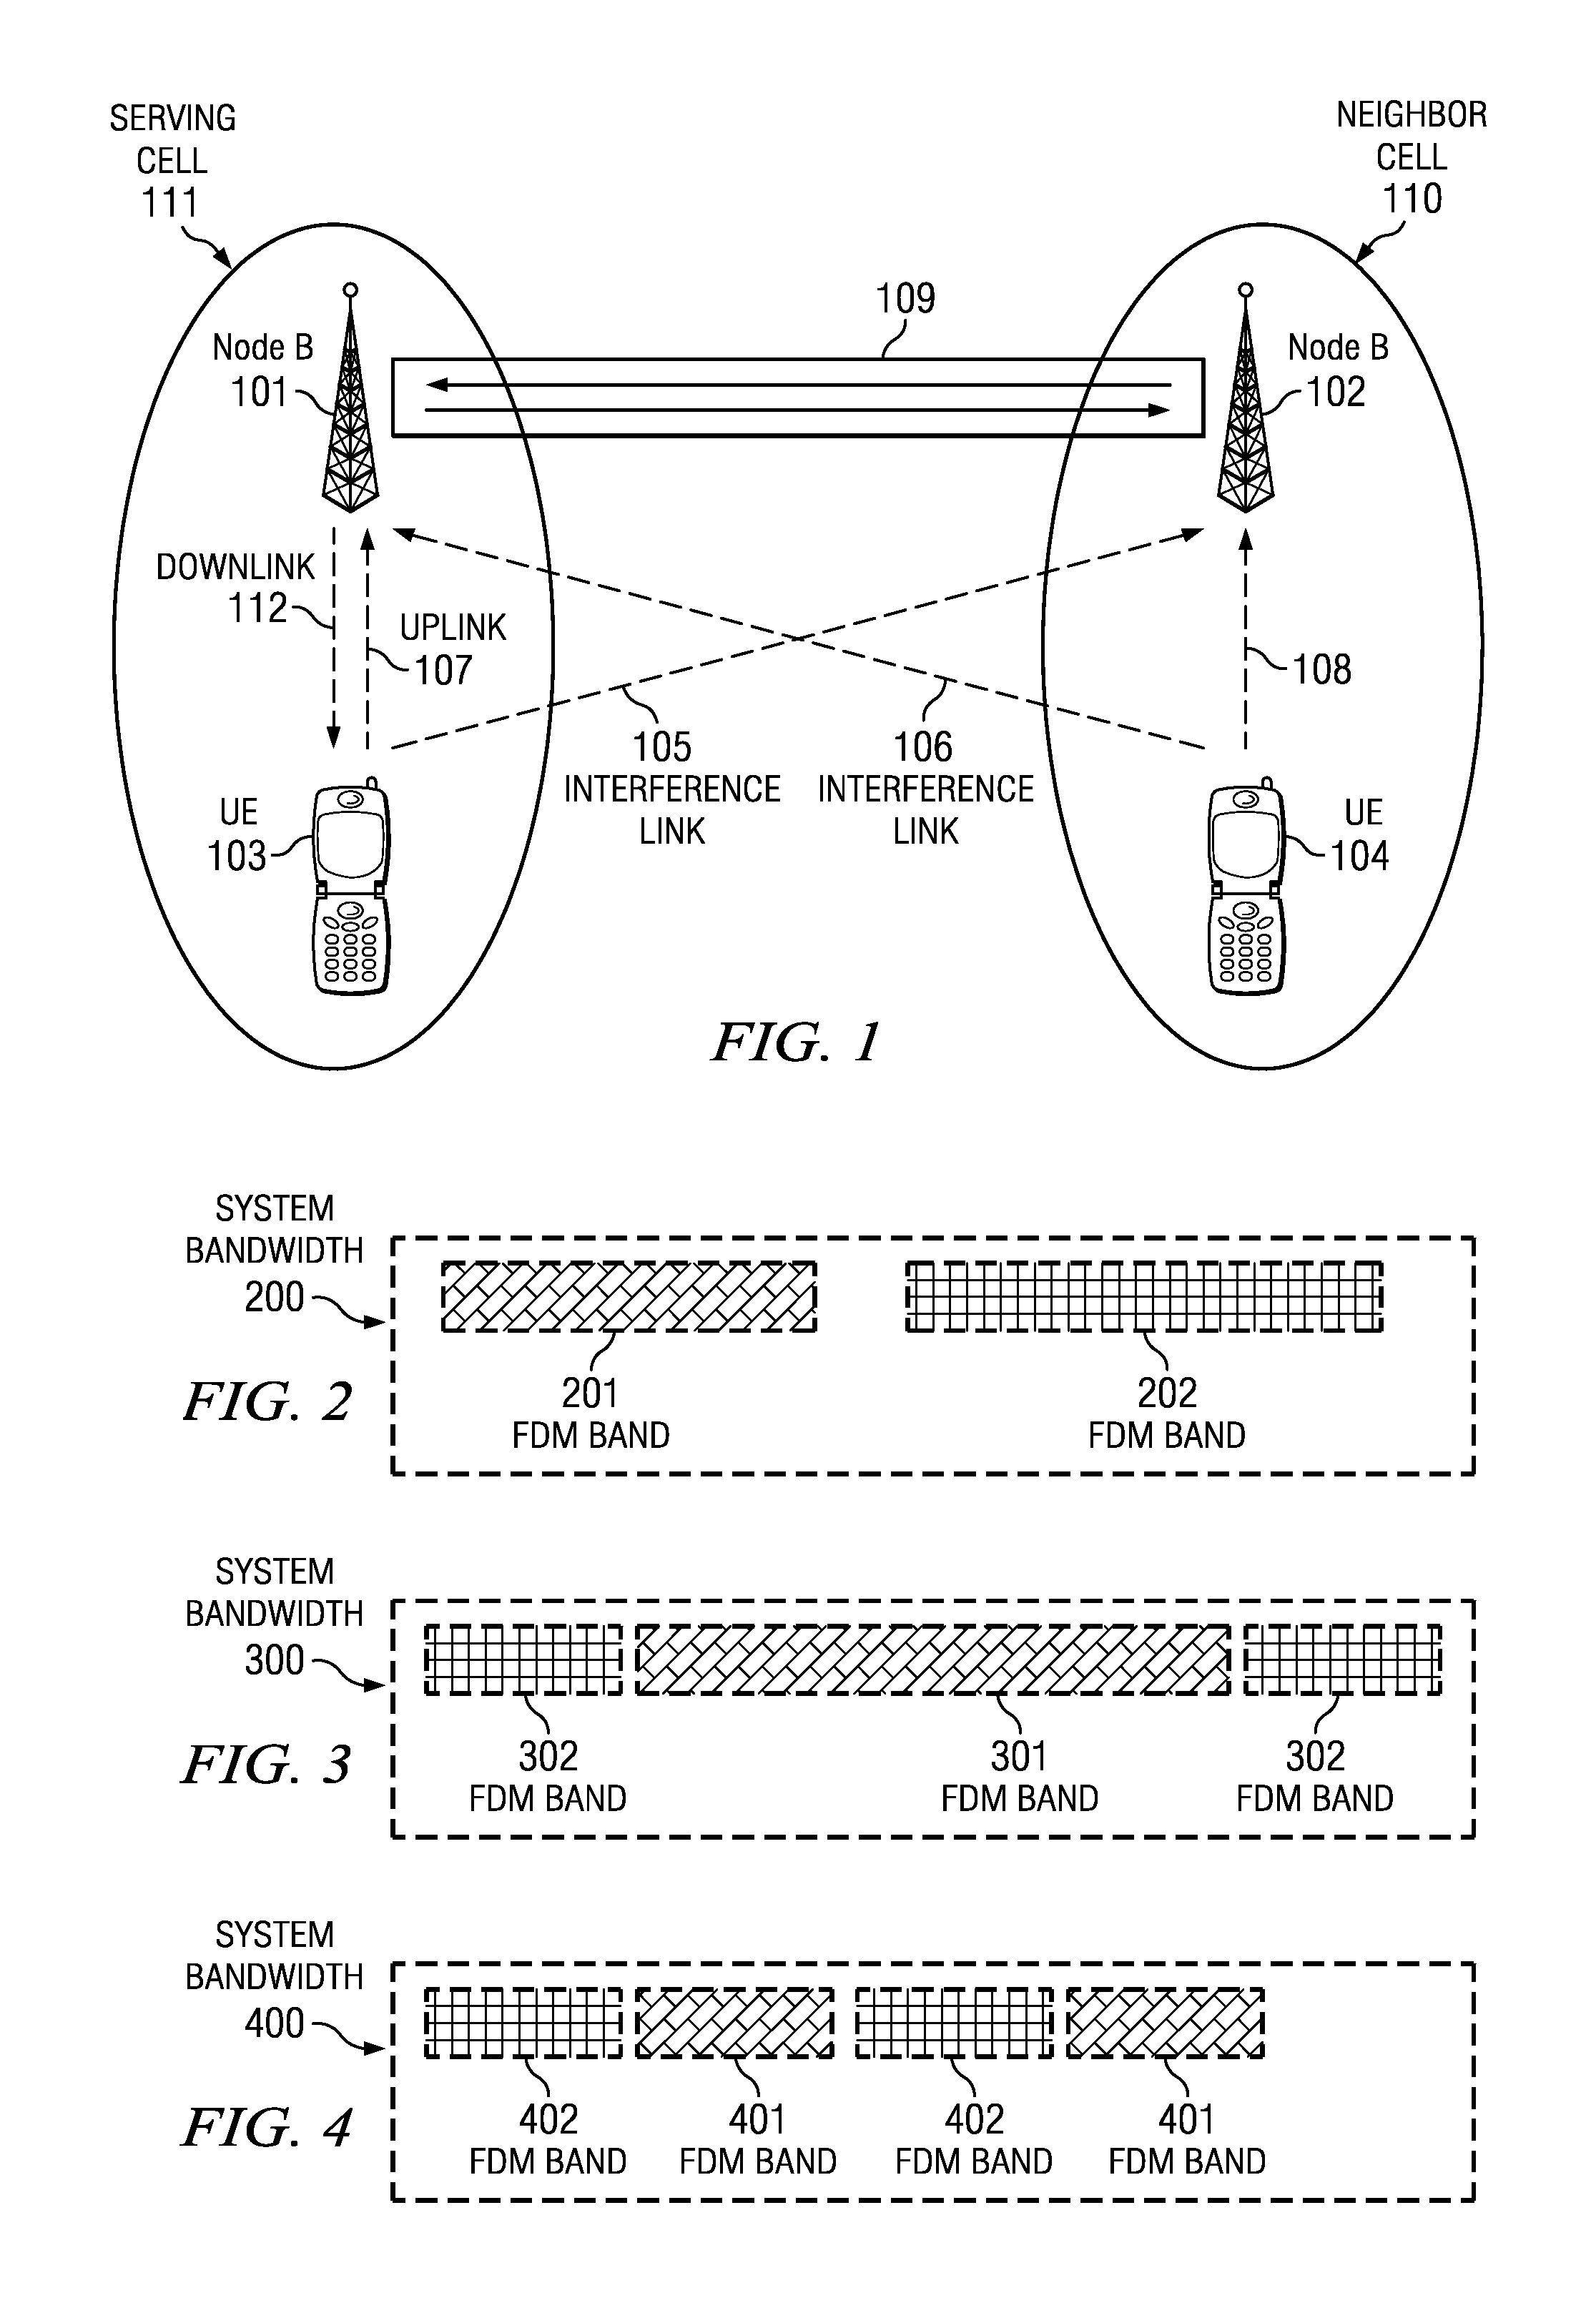 Network-based inter-cell power control for multi-channel wireless networks